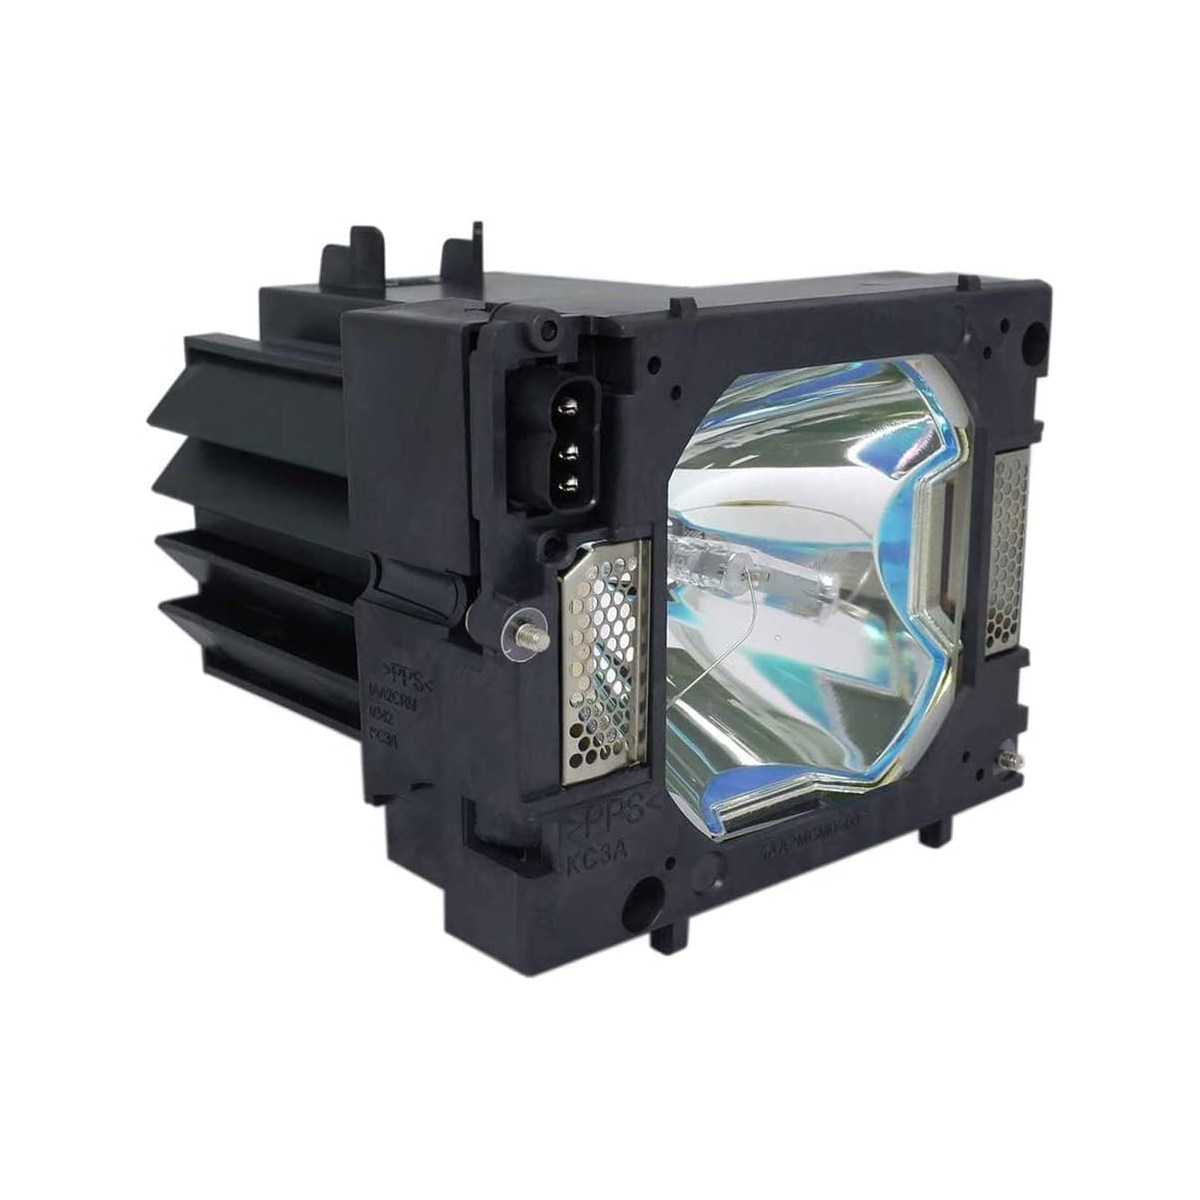 Replacement Projector lamp POA-LMP149 For SANYO PLC-HP7000